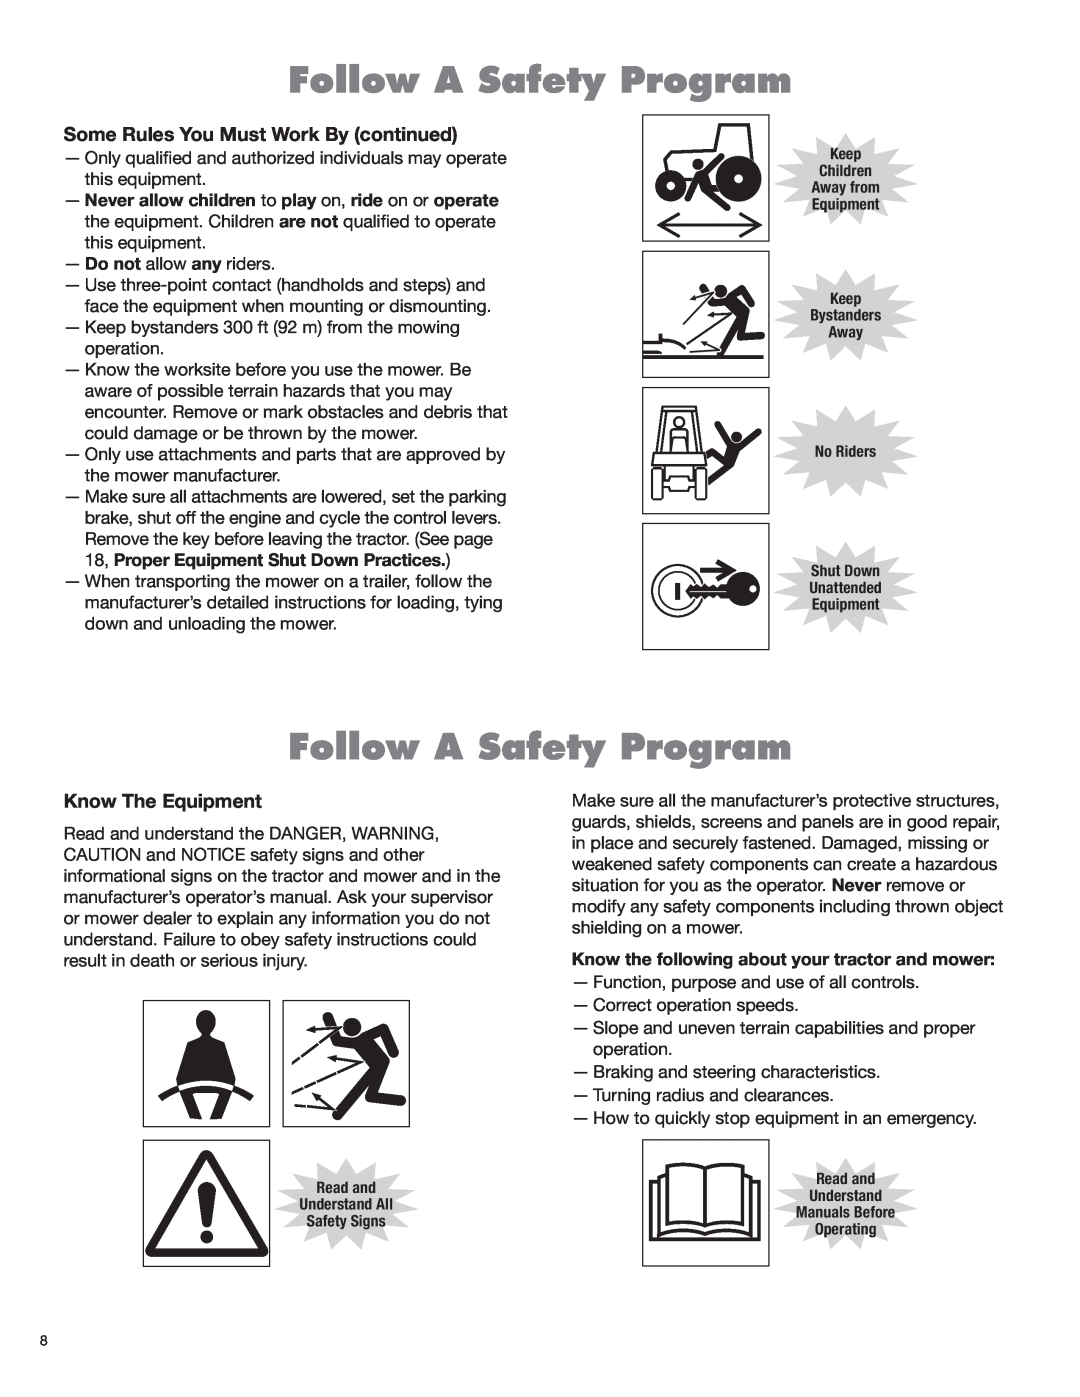 Blue Rhino FC-0024, FC-0025 manual Follow A Safety Program, Some Rules You Must Work By continued, Know The Equipment 